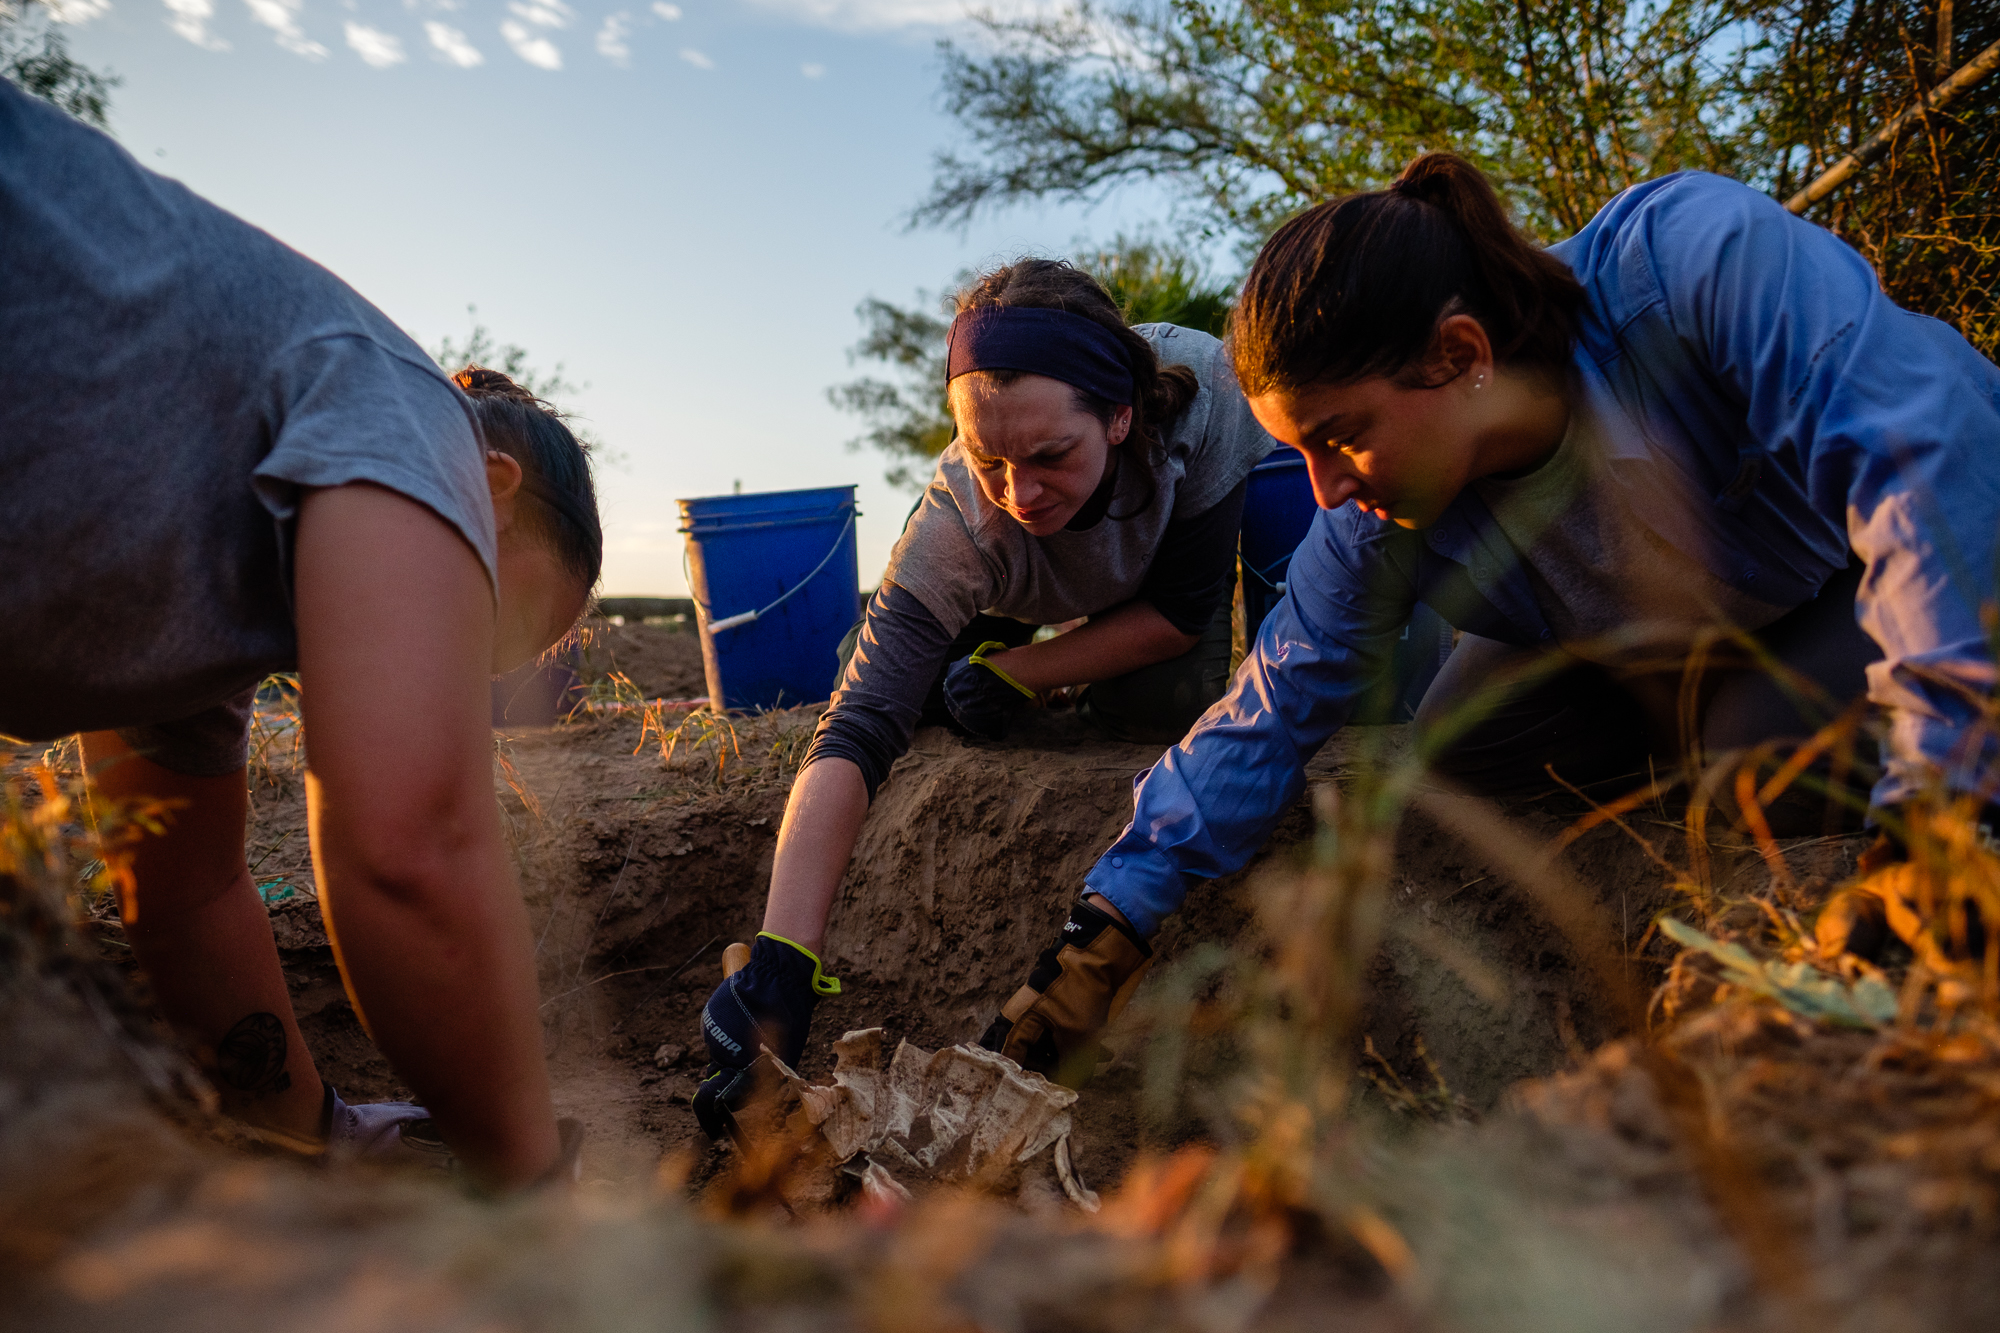 Behind the scenes photo from "El Equipo" showing team members working on a dig